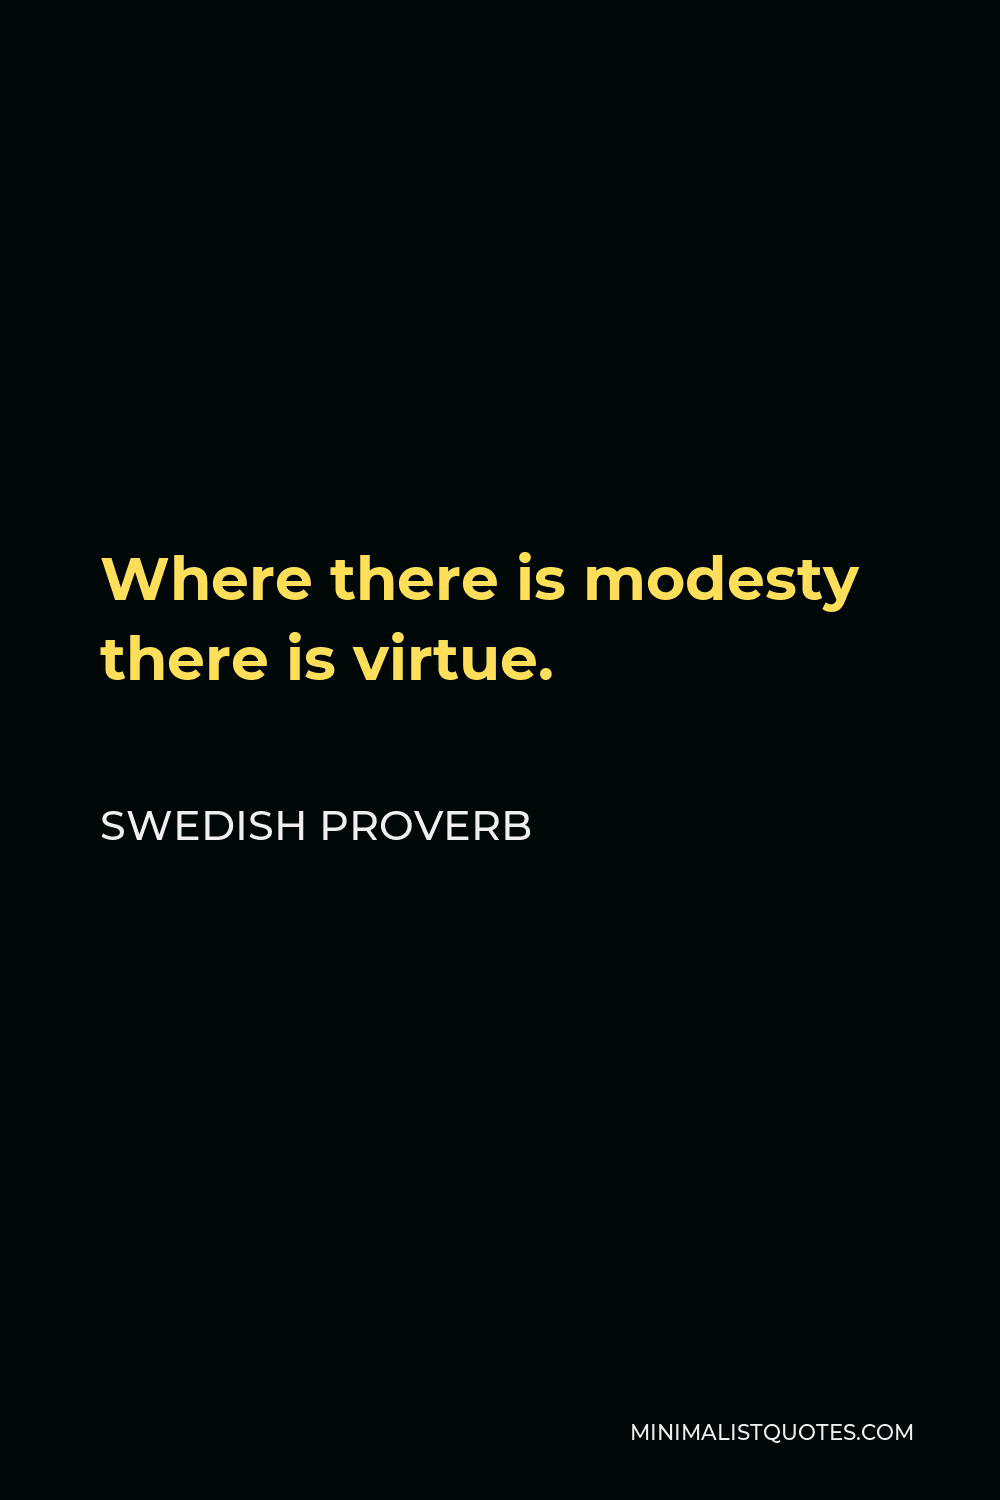 Swedish Proverb Quote - Where there is modesty there is virtue.